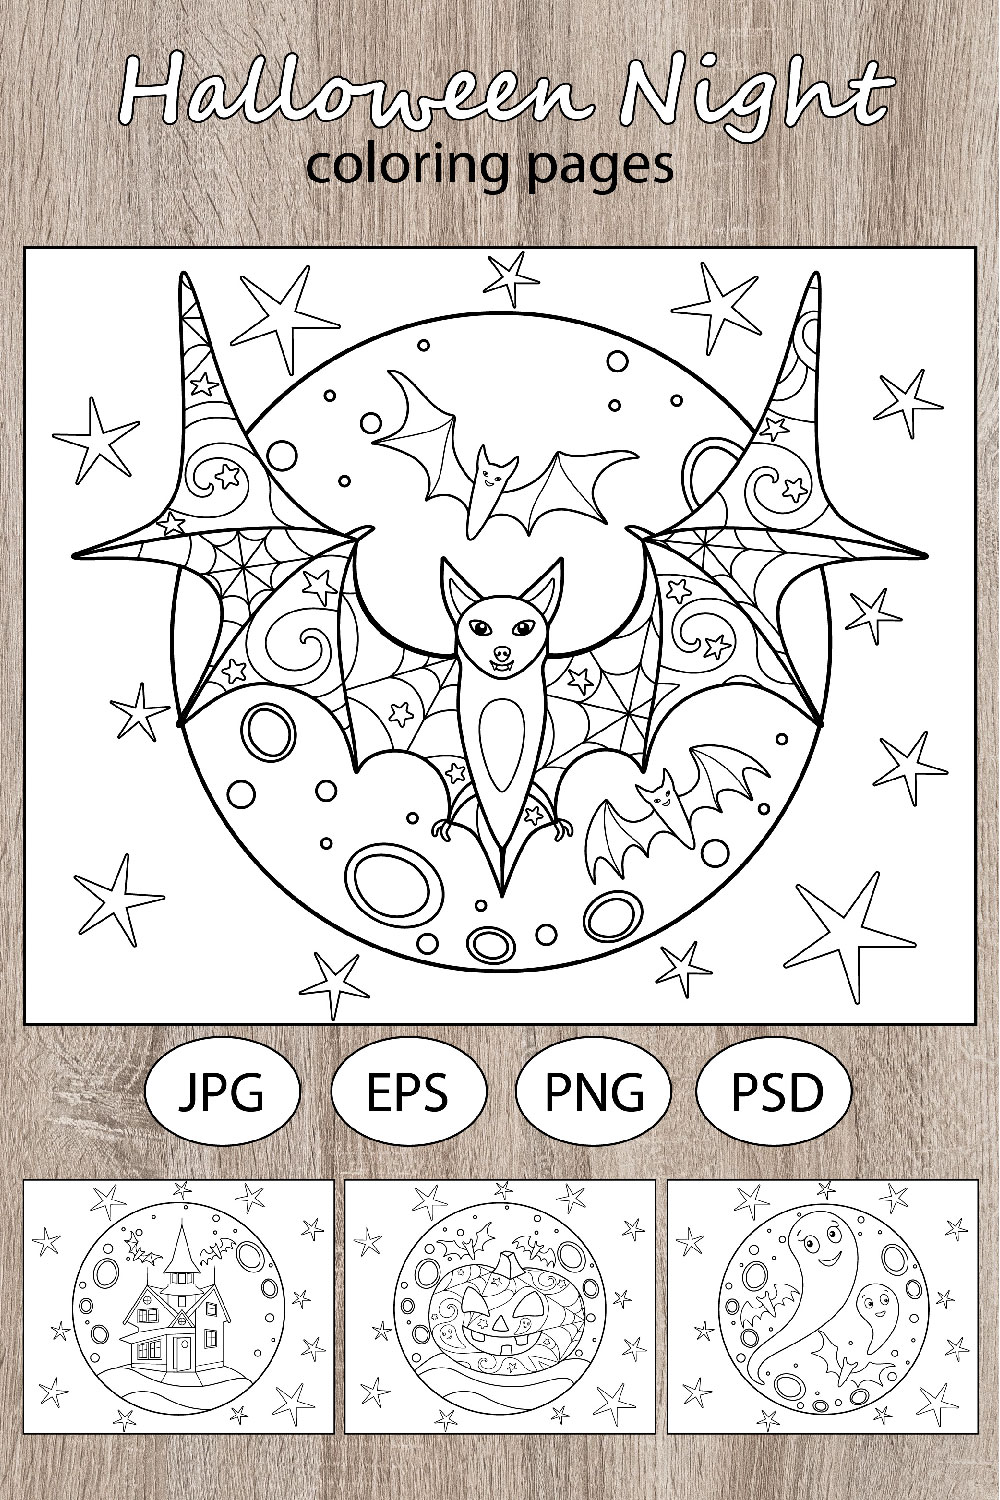 Halloween night - 4 holiday coloring pages pinterest preview image.